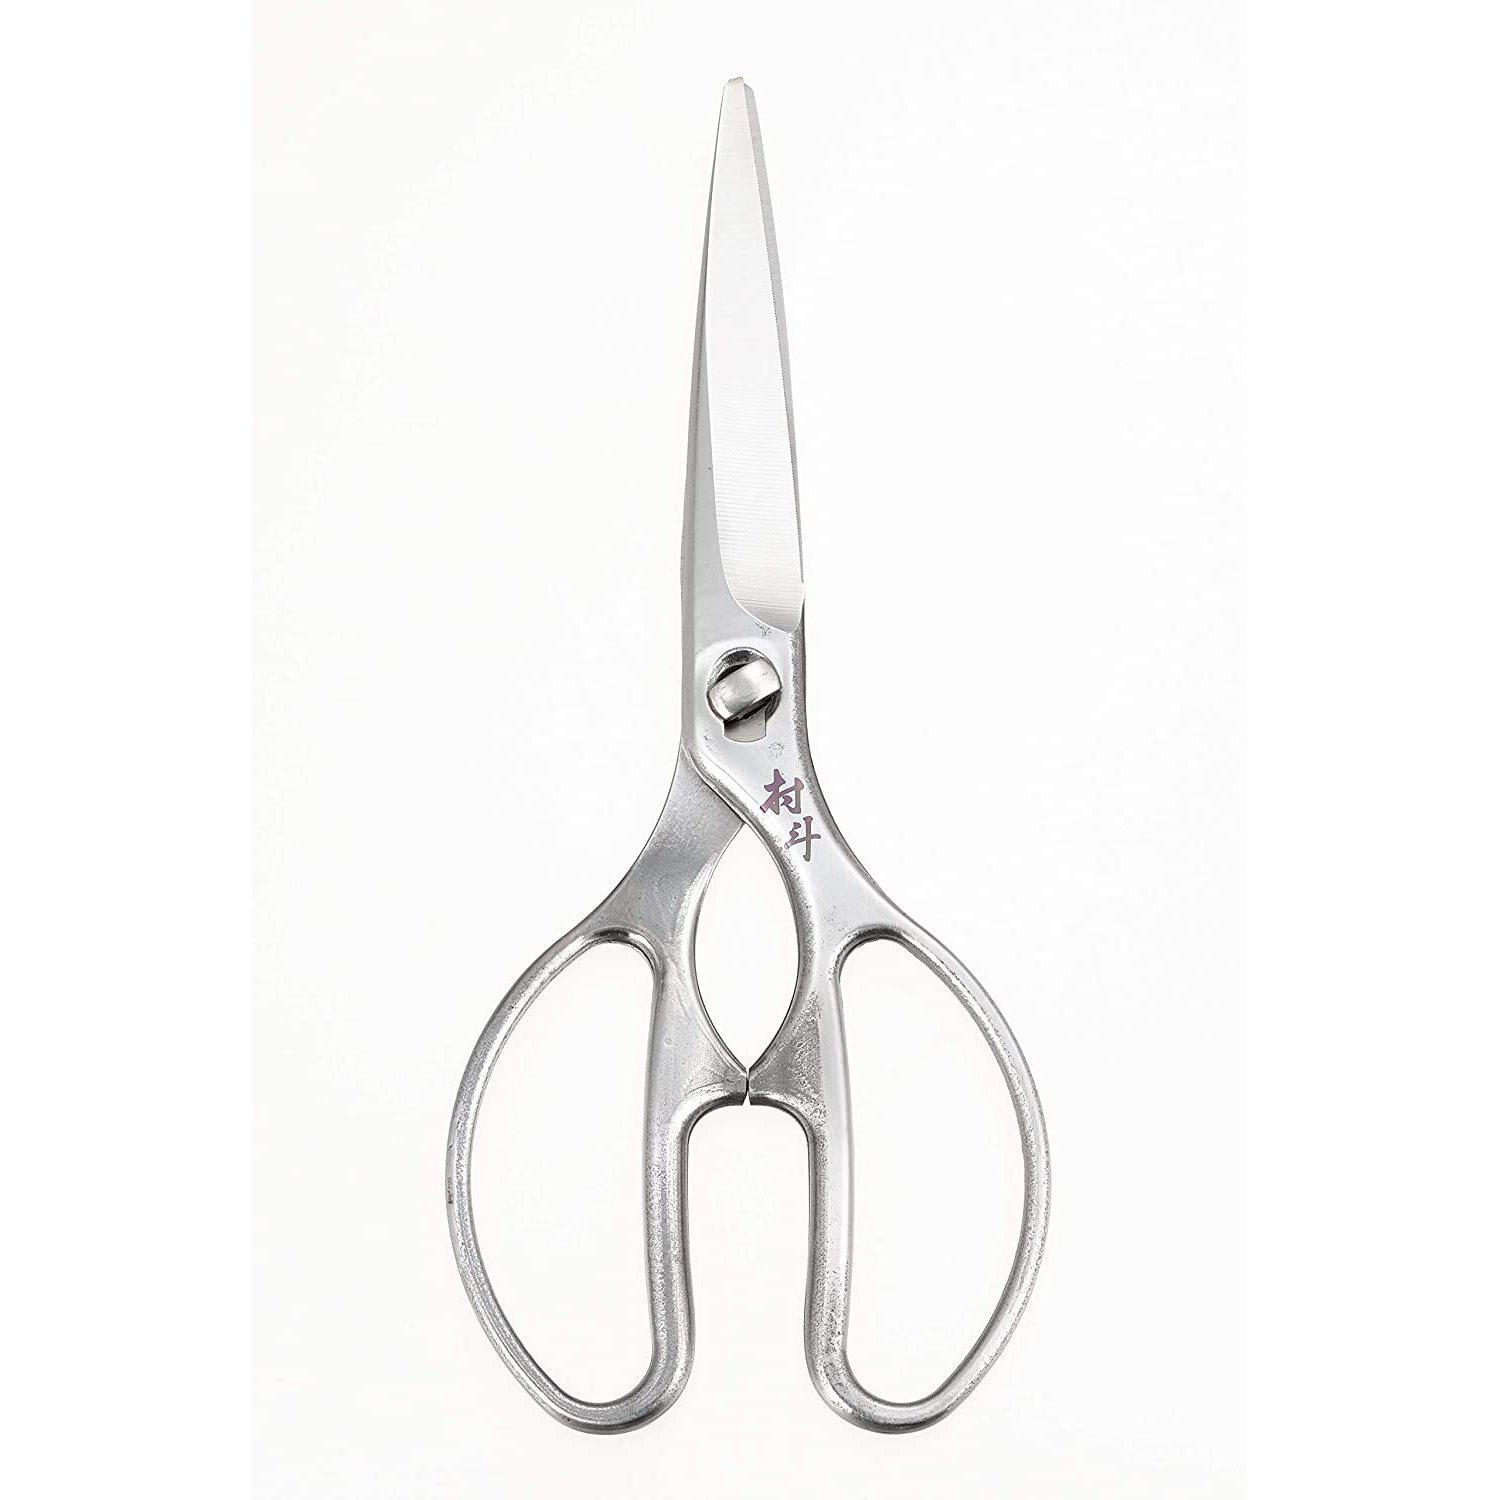 Forged Kitchen Shears